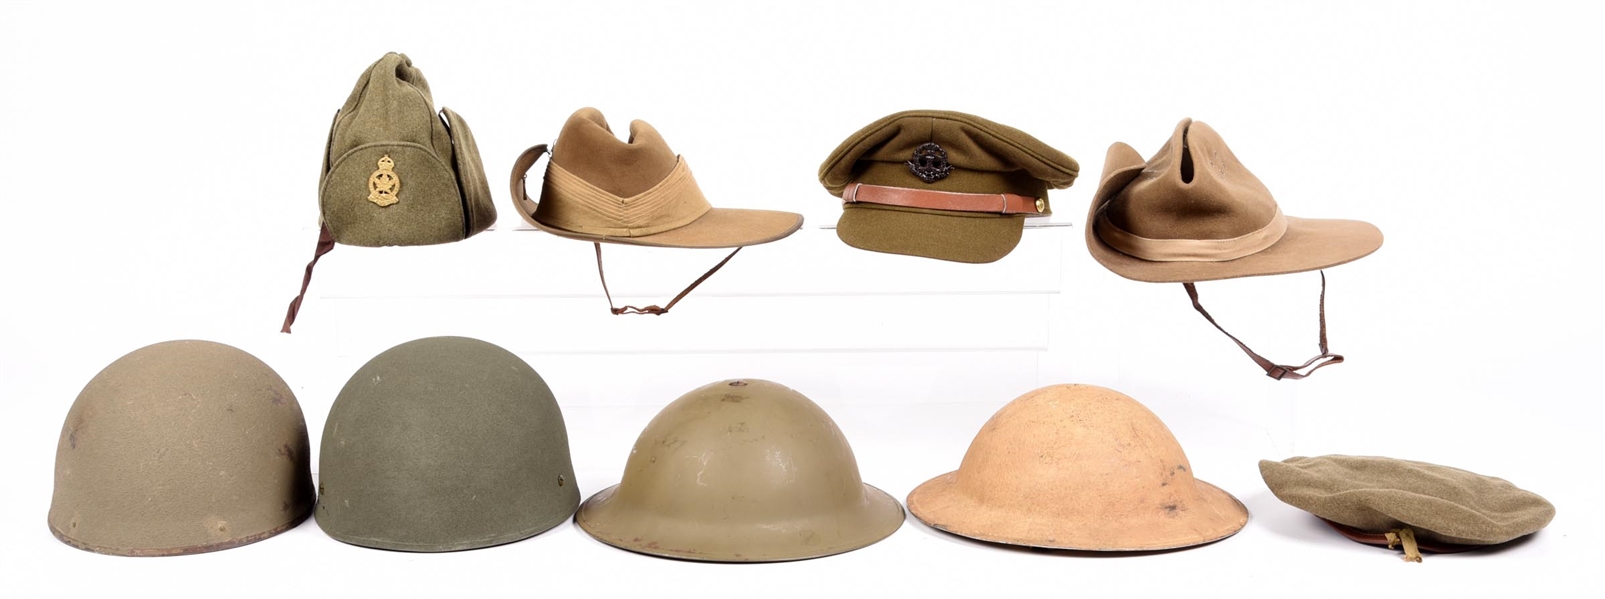 LOT OF BRITISH AND AUSTRALIAN WWII WWII ERA HATS AND HELMETS.